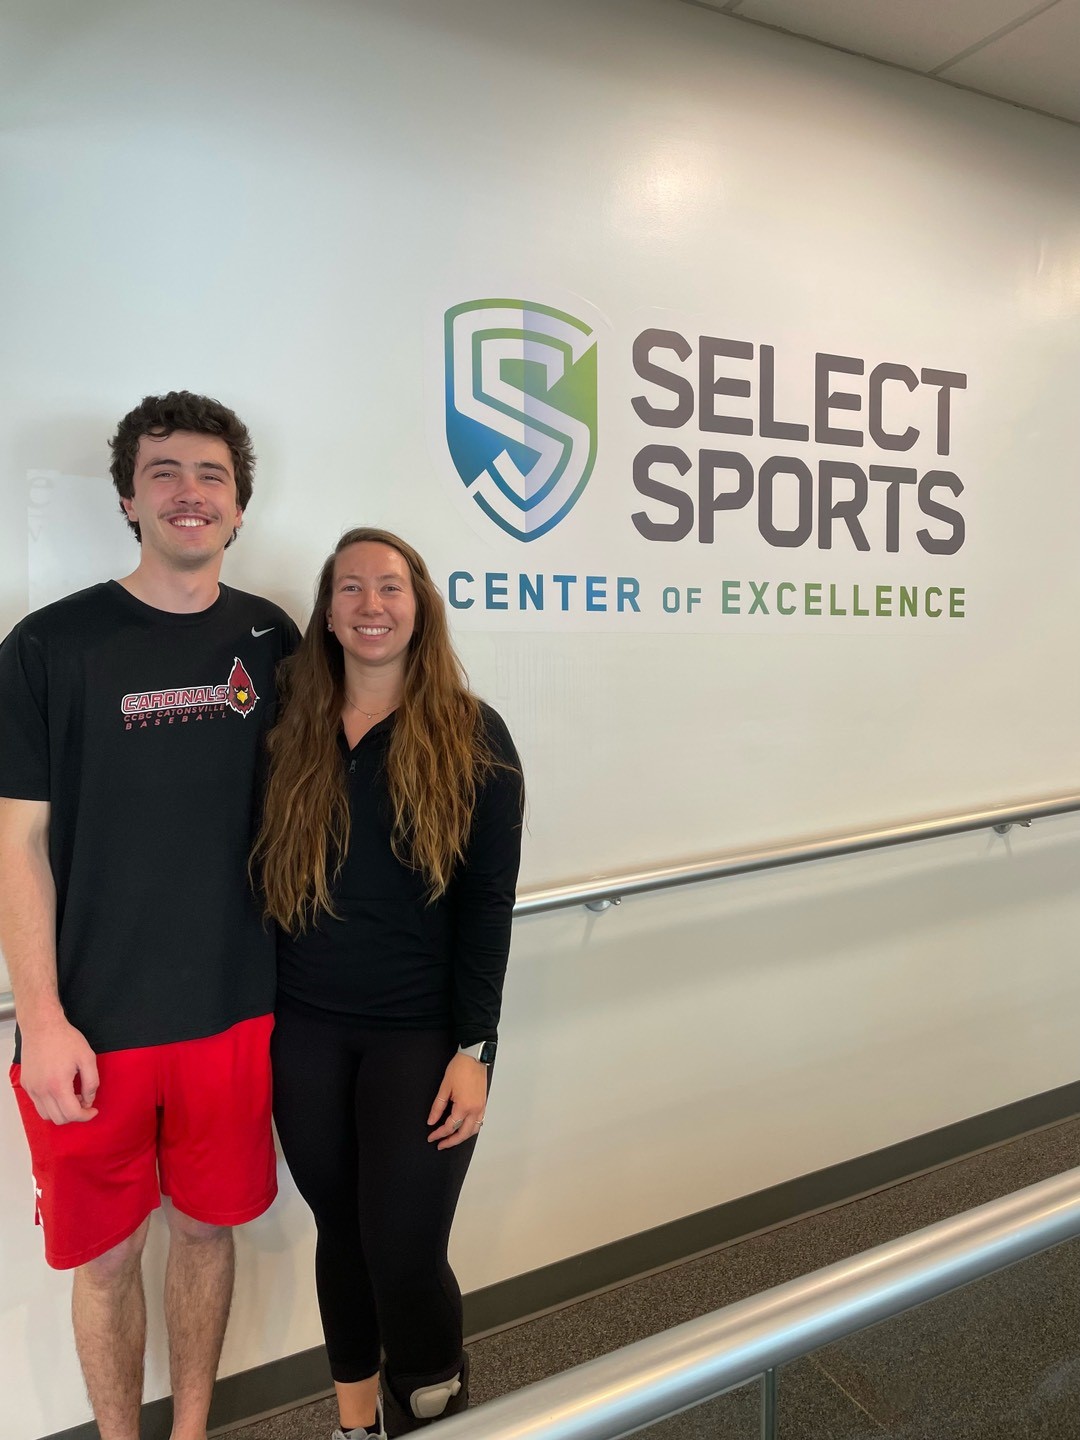 Liam, a patient, posing for a photo with his physical therapist in front of the Select Sports logo. 